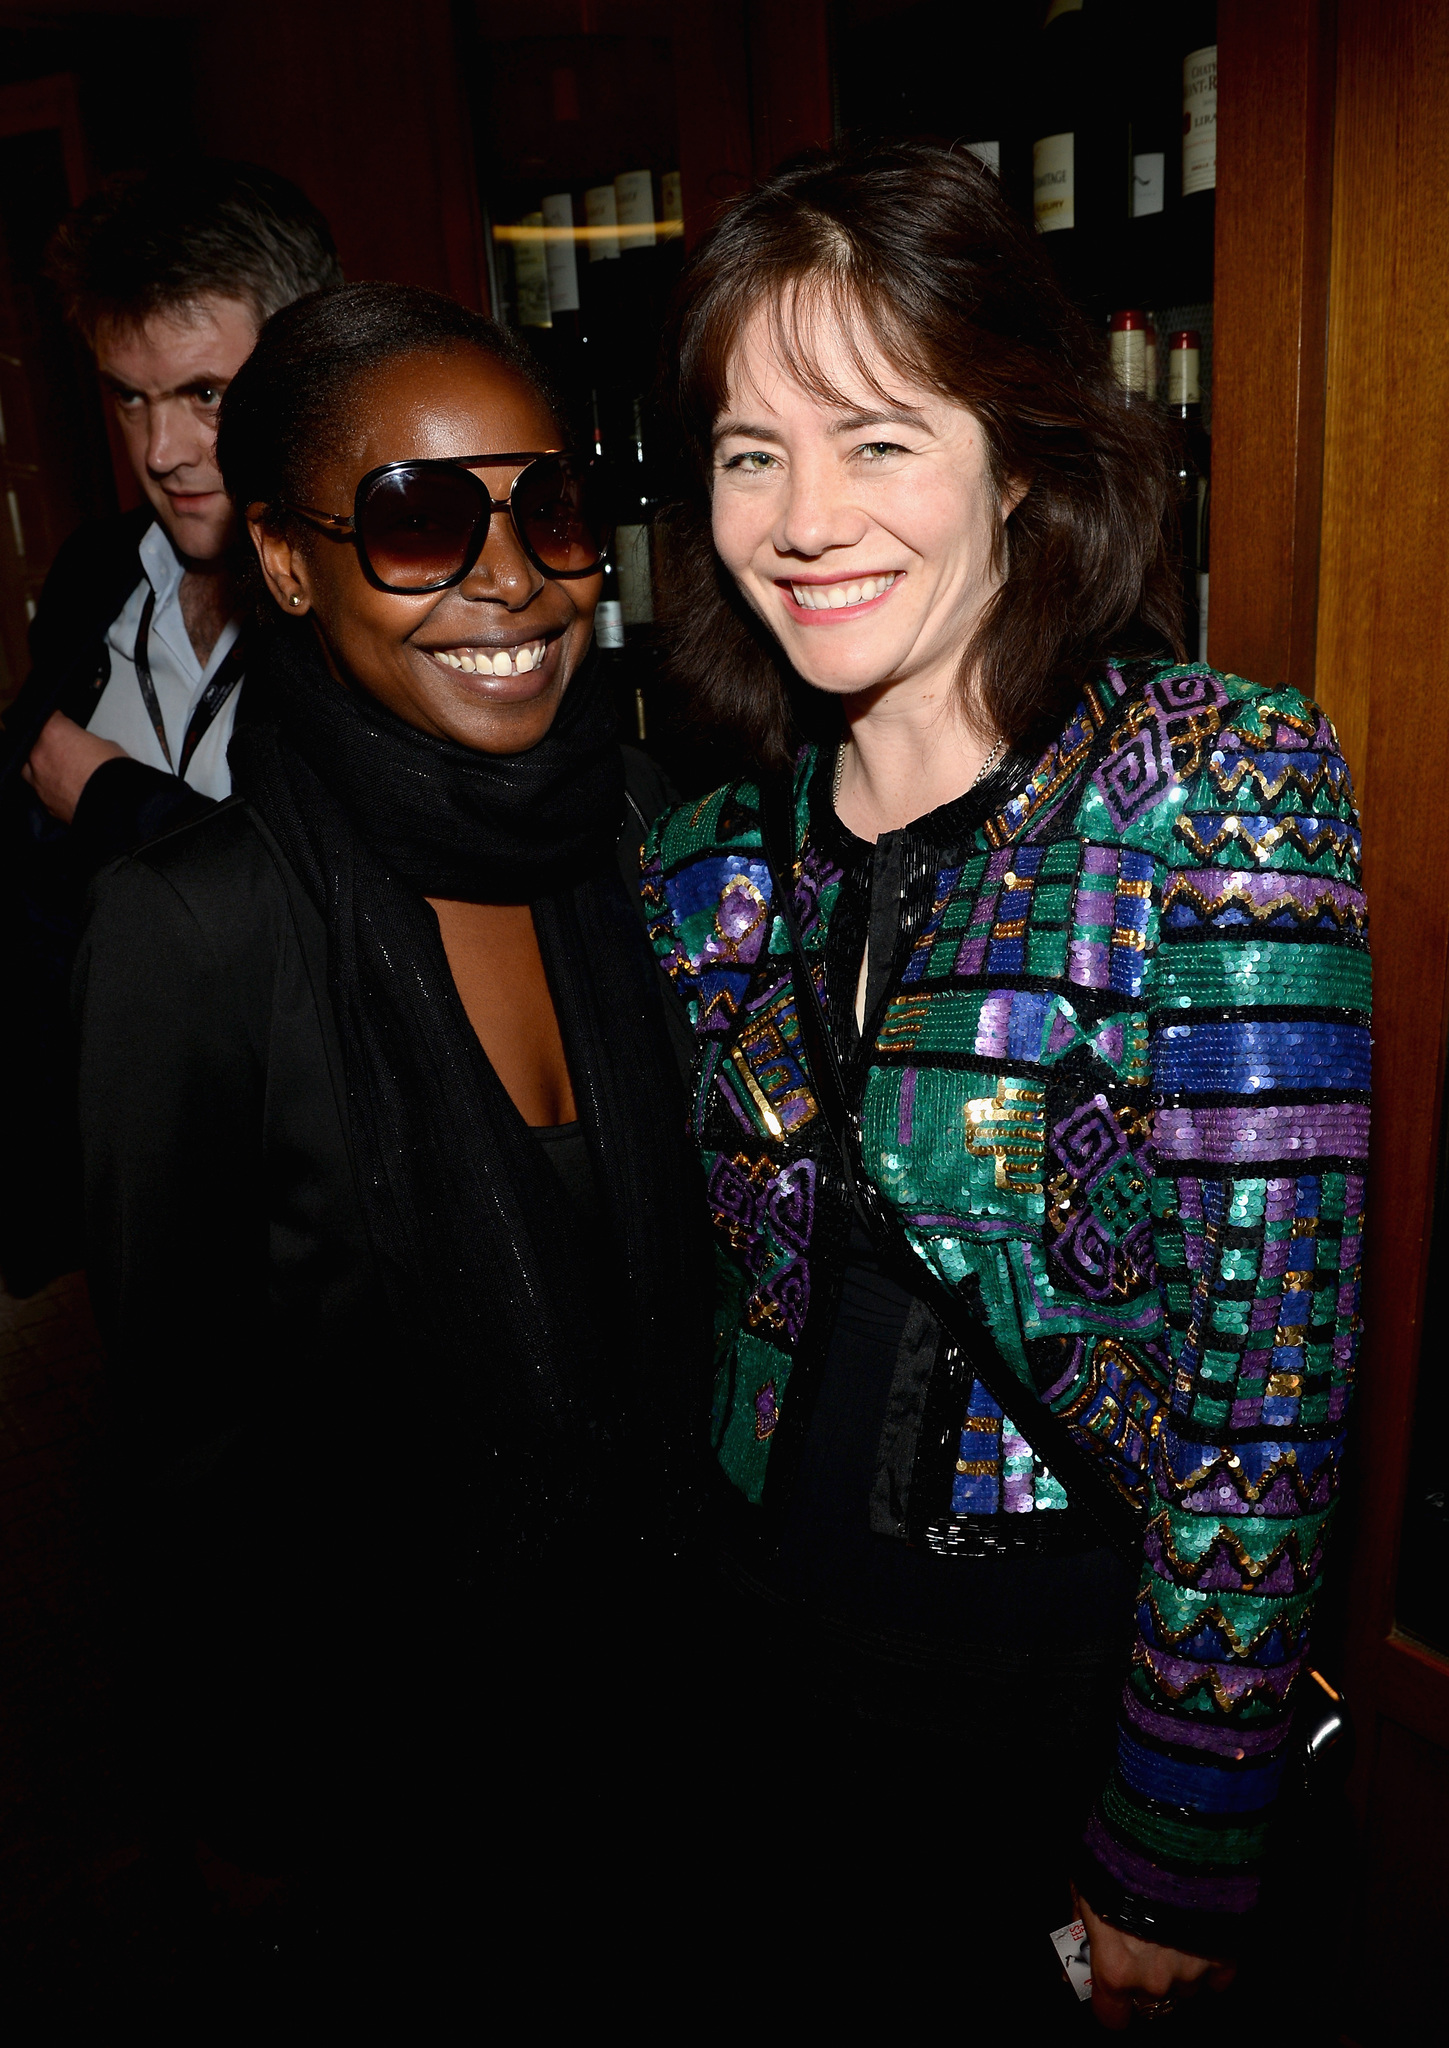 AFI Fest's Jacqueline Lyanga and journalist Jada Yuan attend the IMDB's 2013 Cannes Film Festival Dinner Party during the 66th Annual Cannes Film Festival at Restaurant Mantel on May 20, 2013 in Cannes, France.